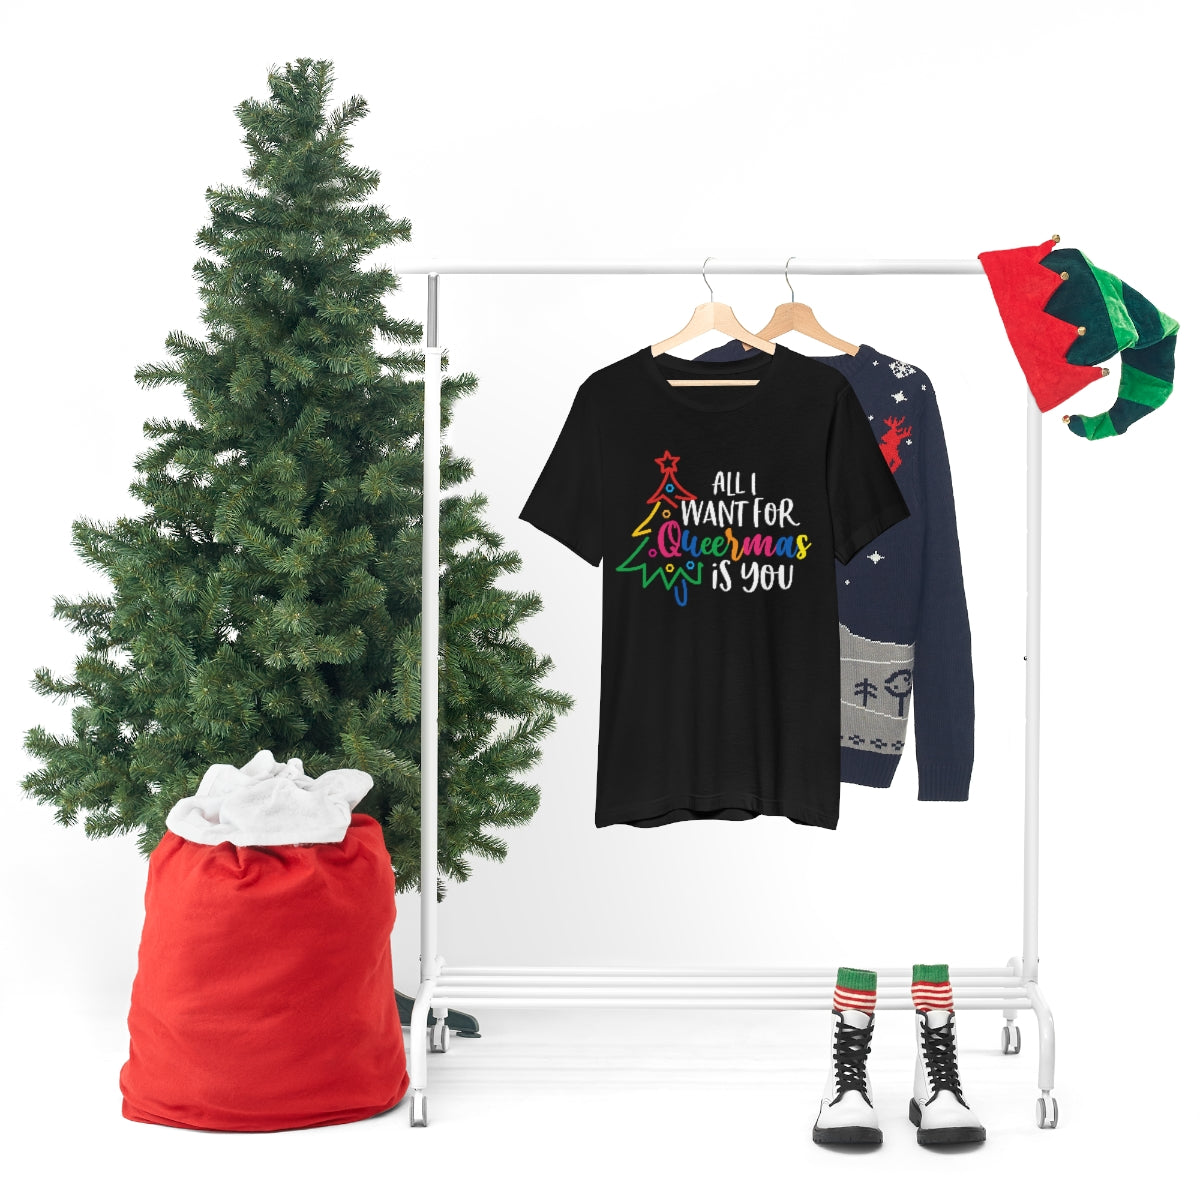 Classic Unisex Christmas LGBTQ T-Shirt - All I want For Queermas Is You Printify